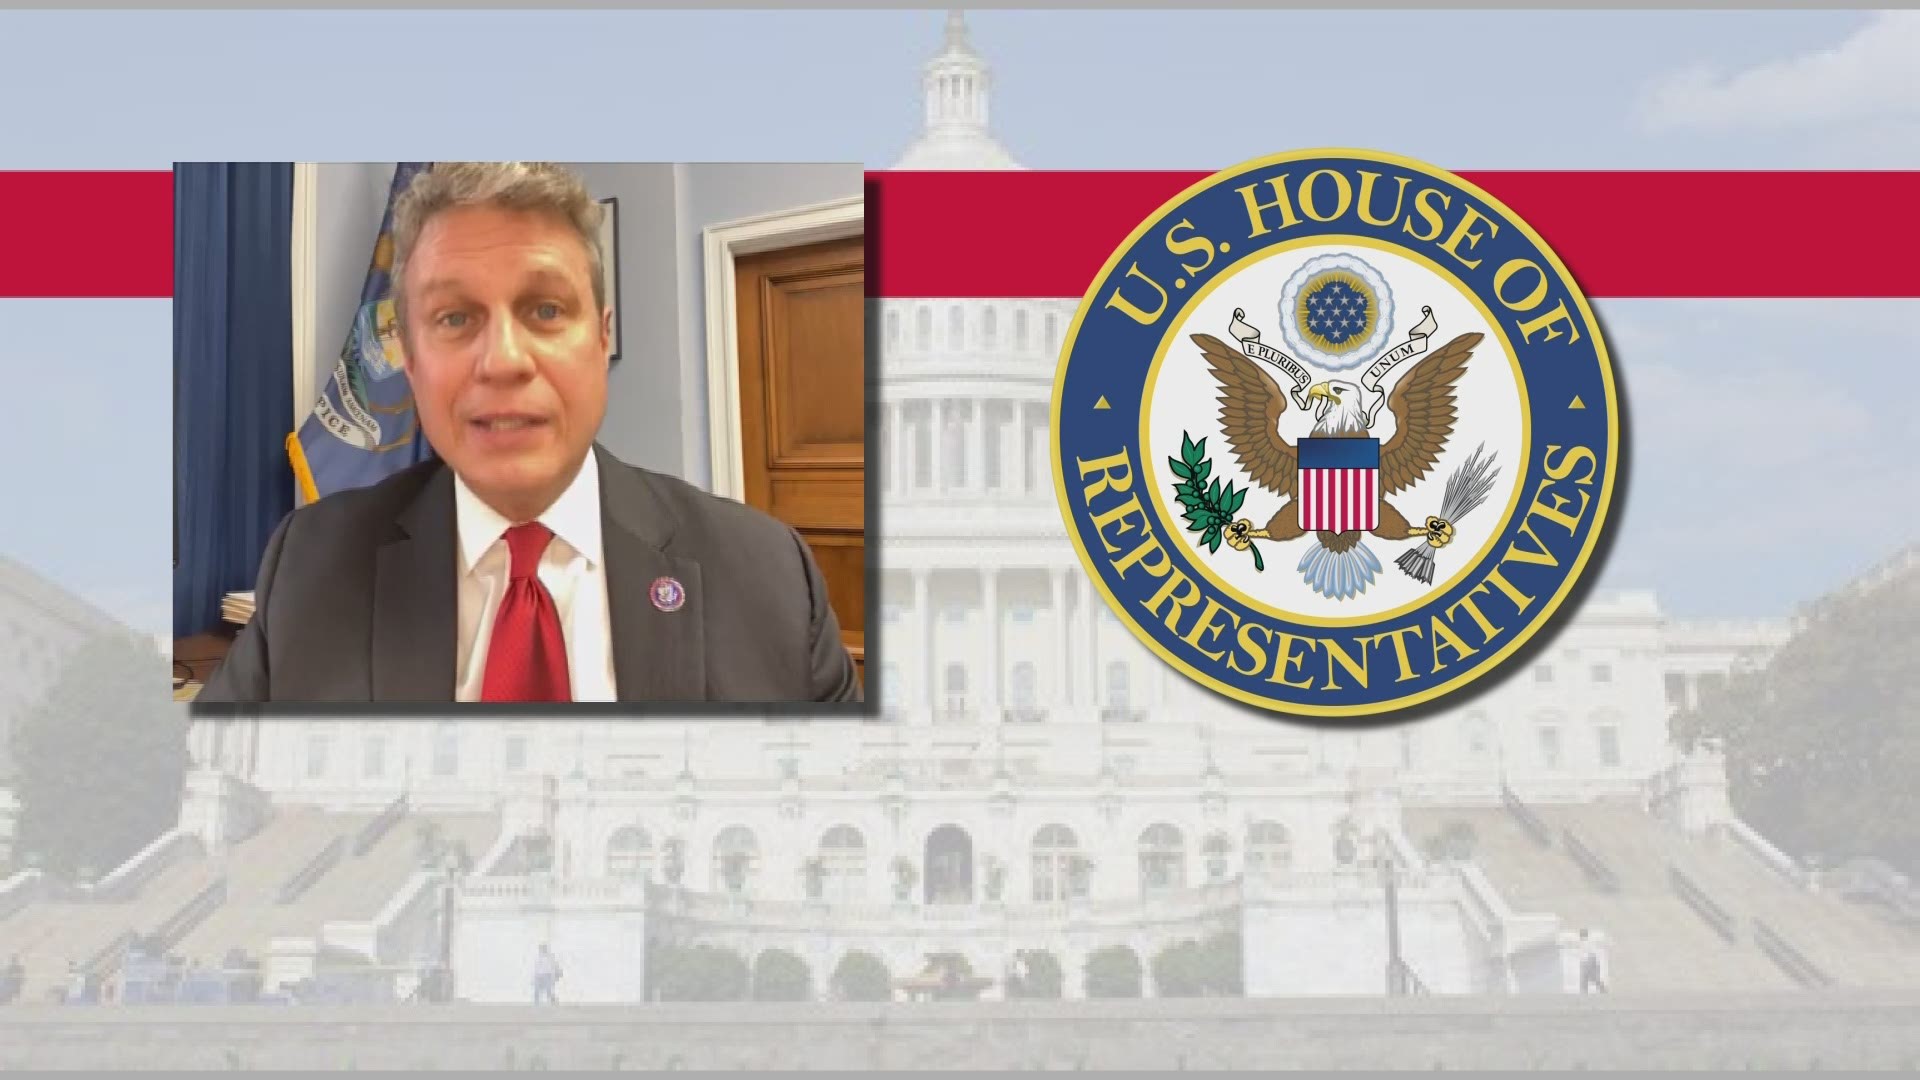 Huizenga was not one of the 10 Republican House members to vote yes on the second impeachment of President Trump.